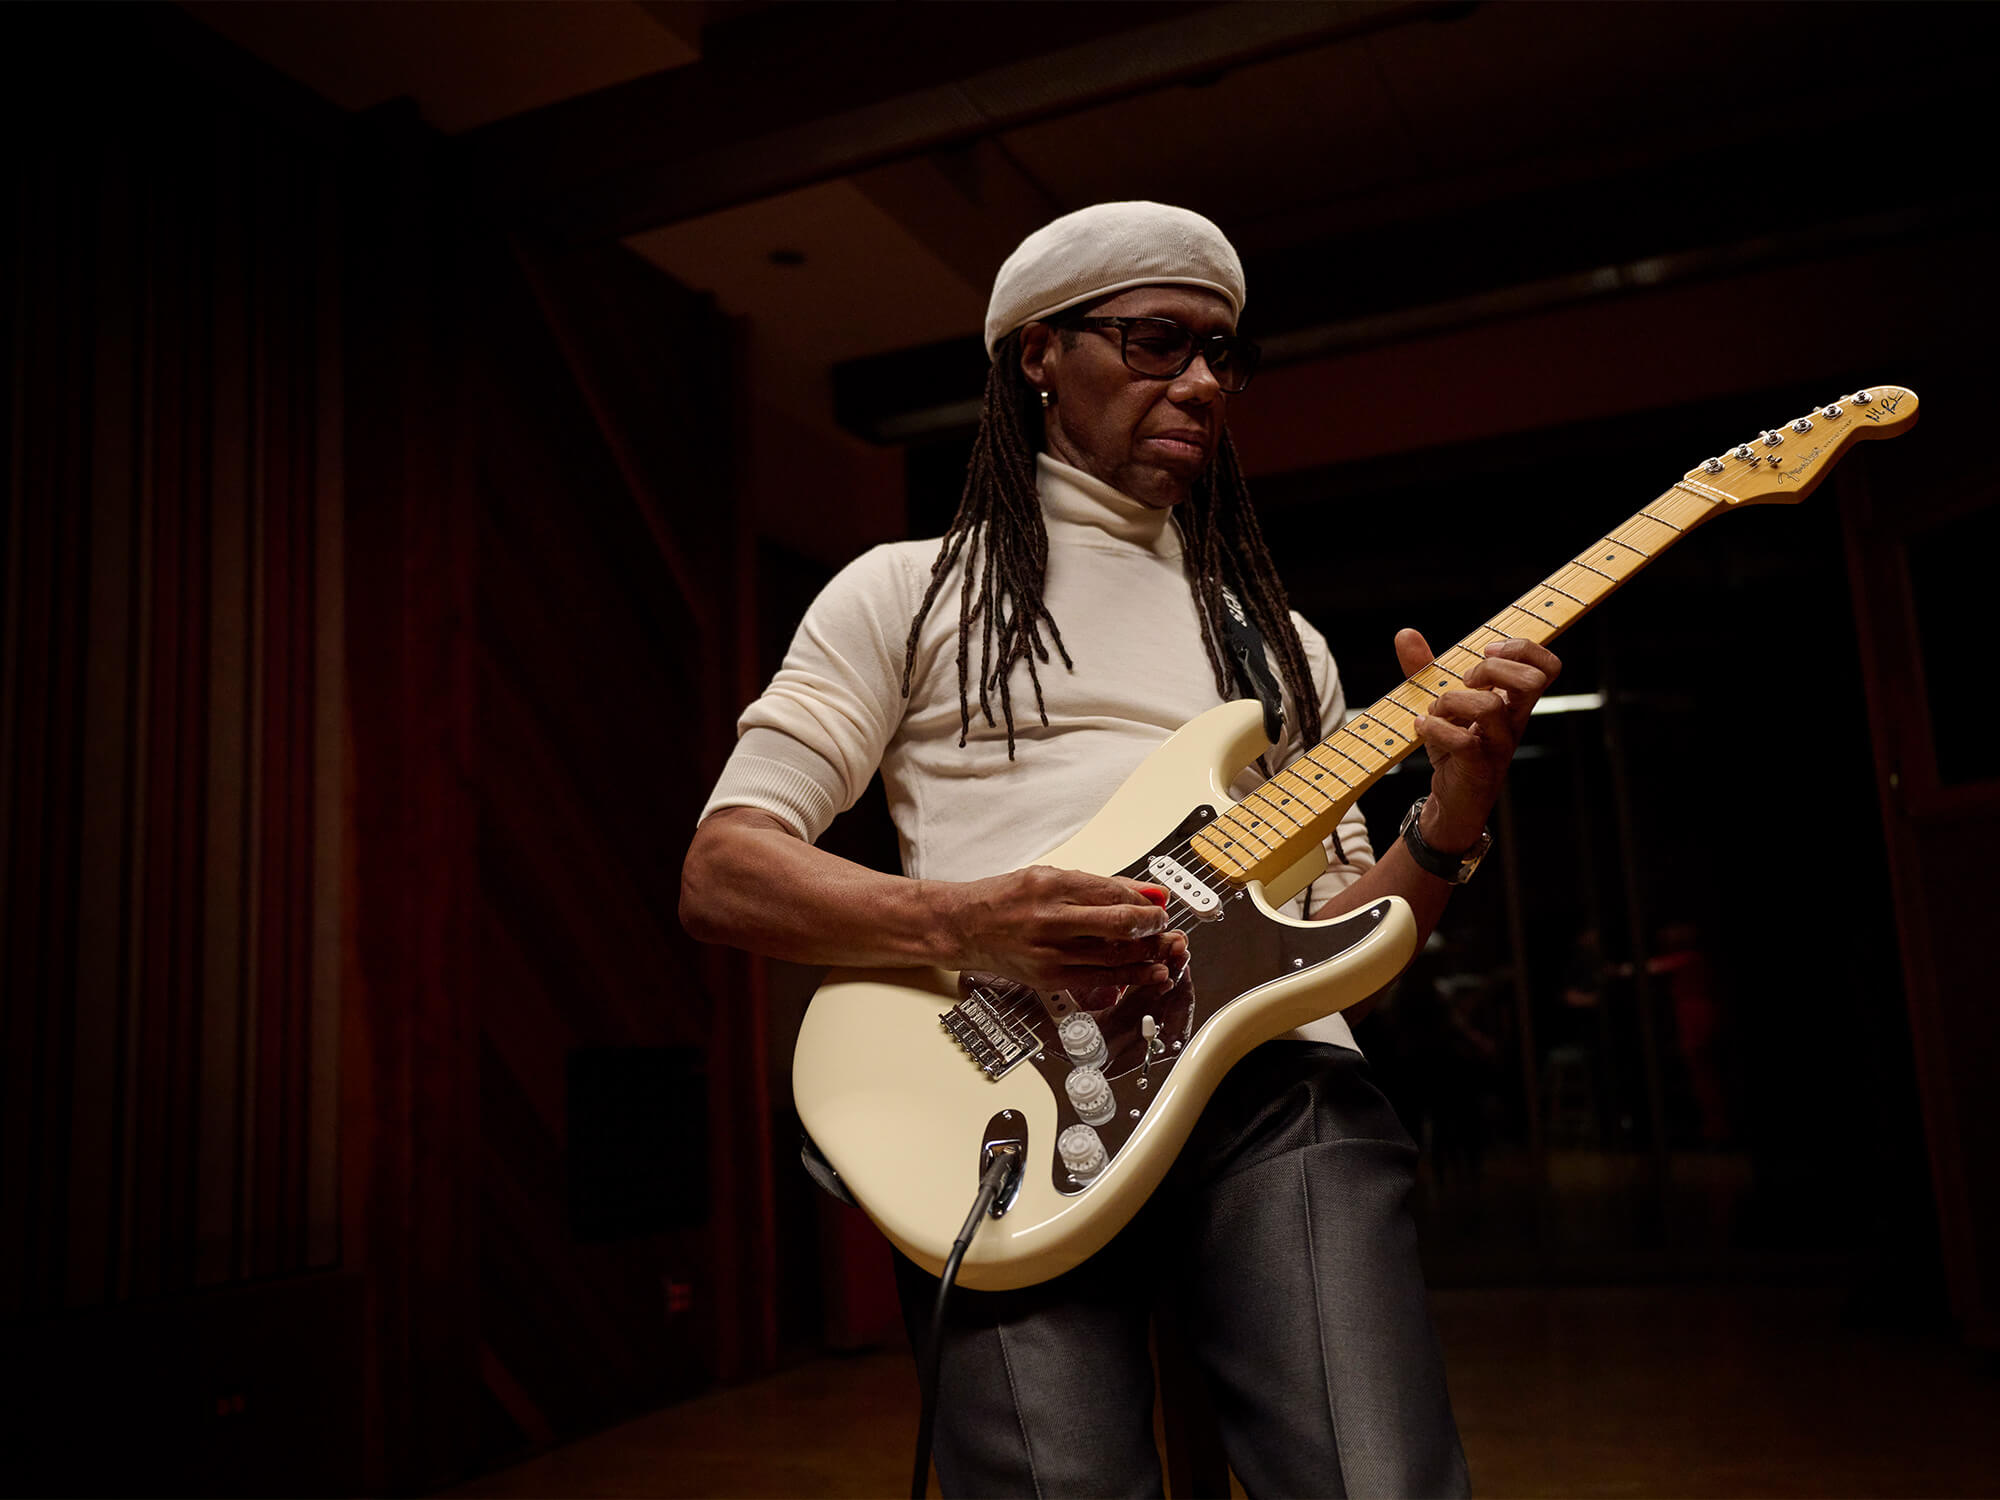 Nile Rodgers with his Fender Hitmaker Strat